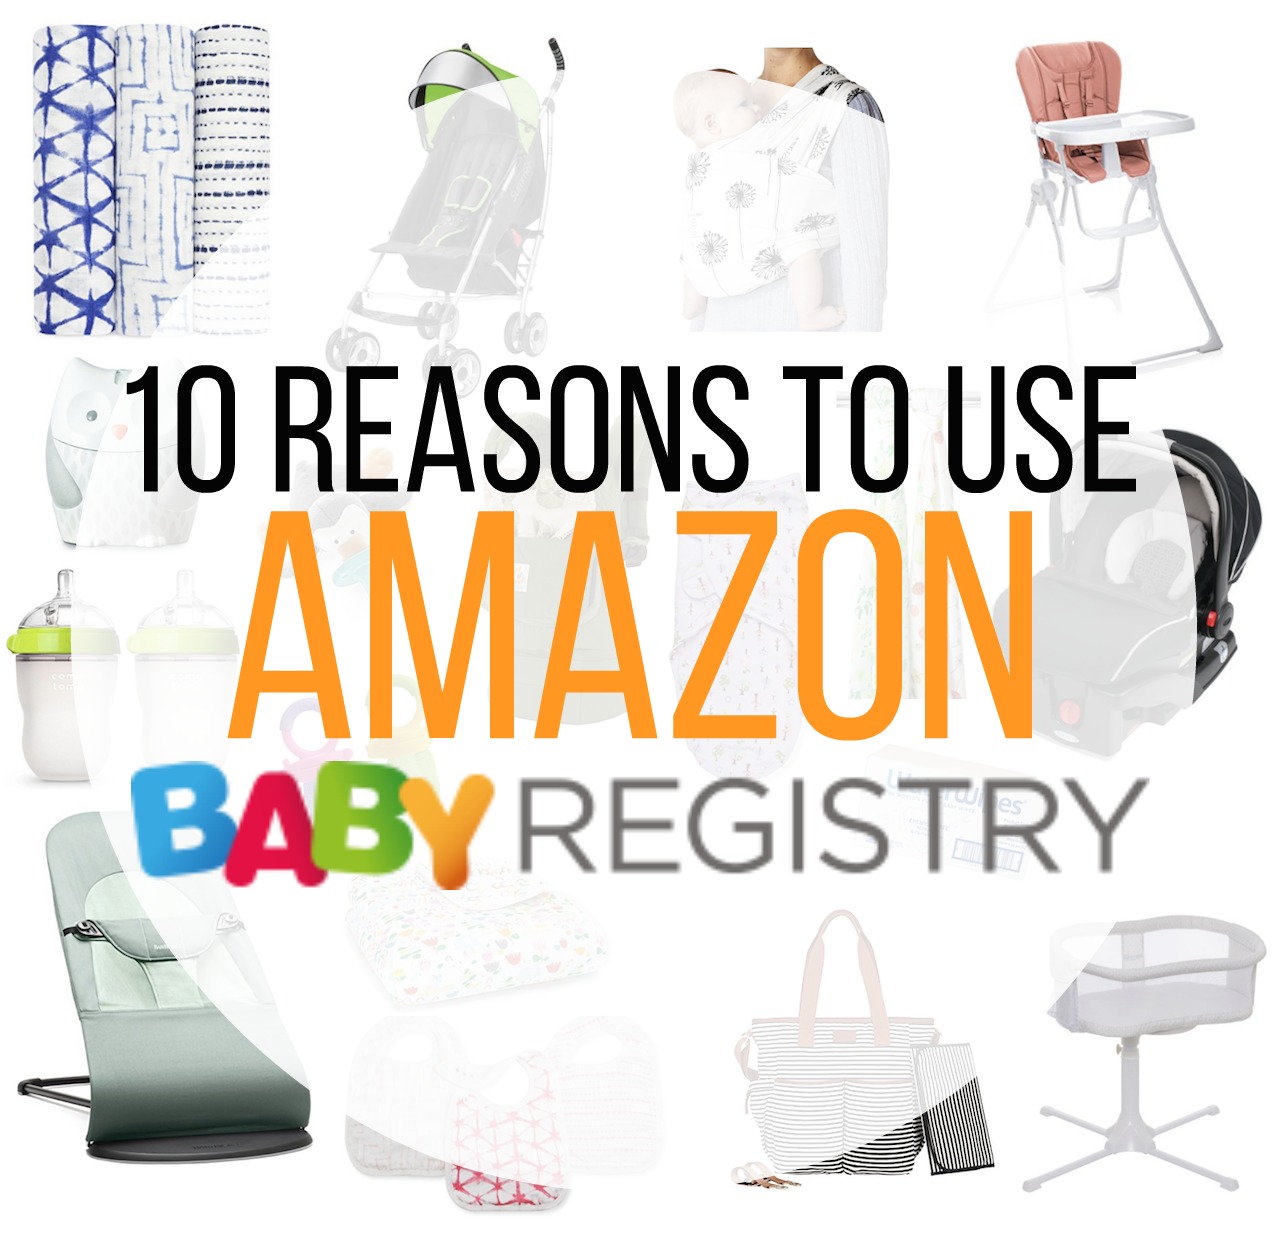 10 Reasons to Use Amazon Baby Registry